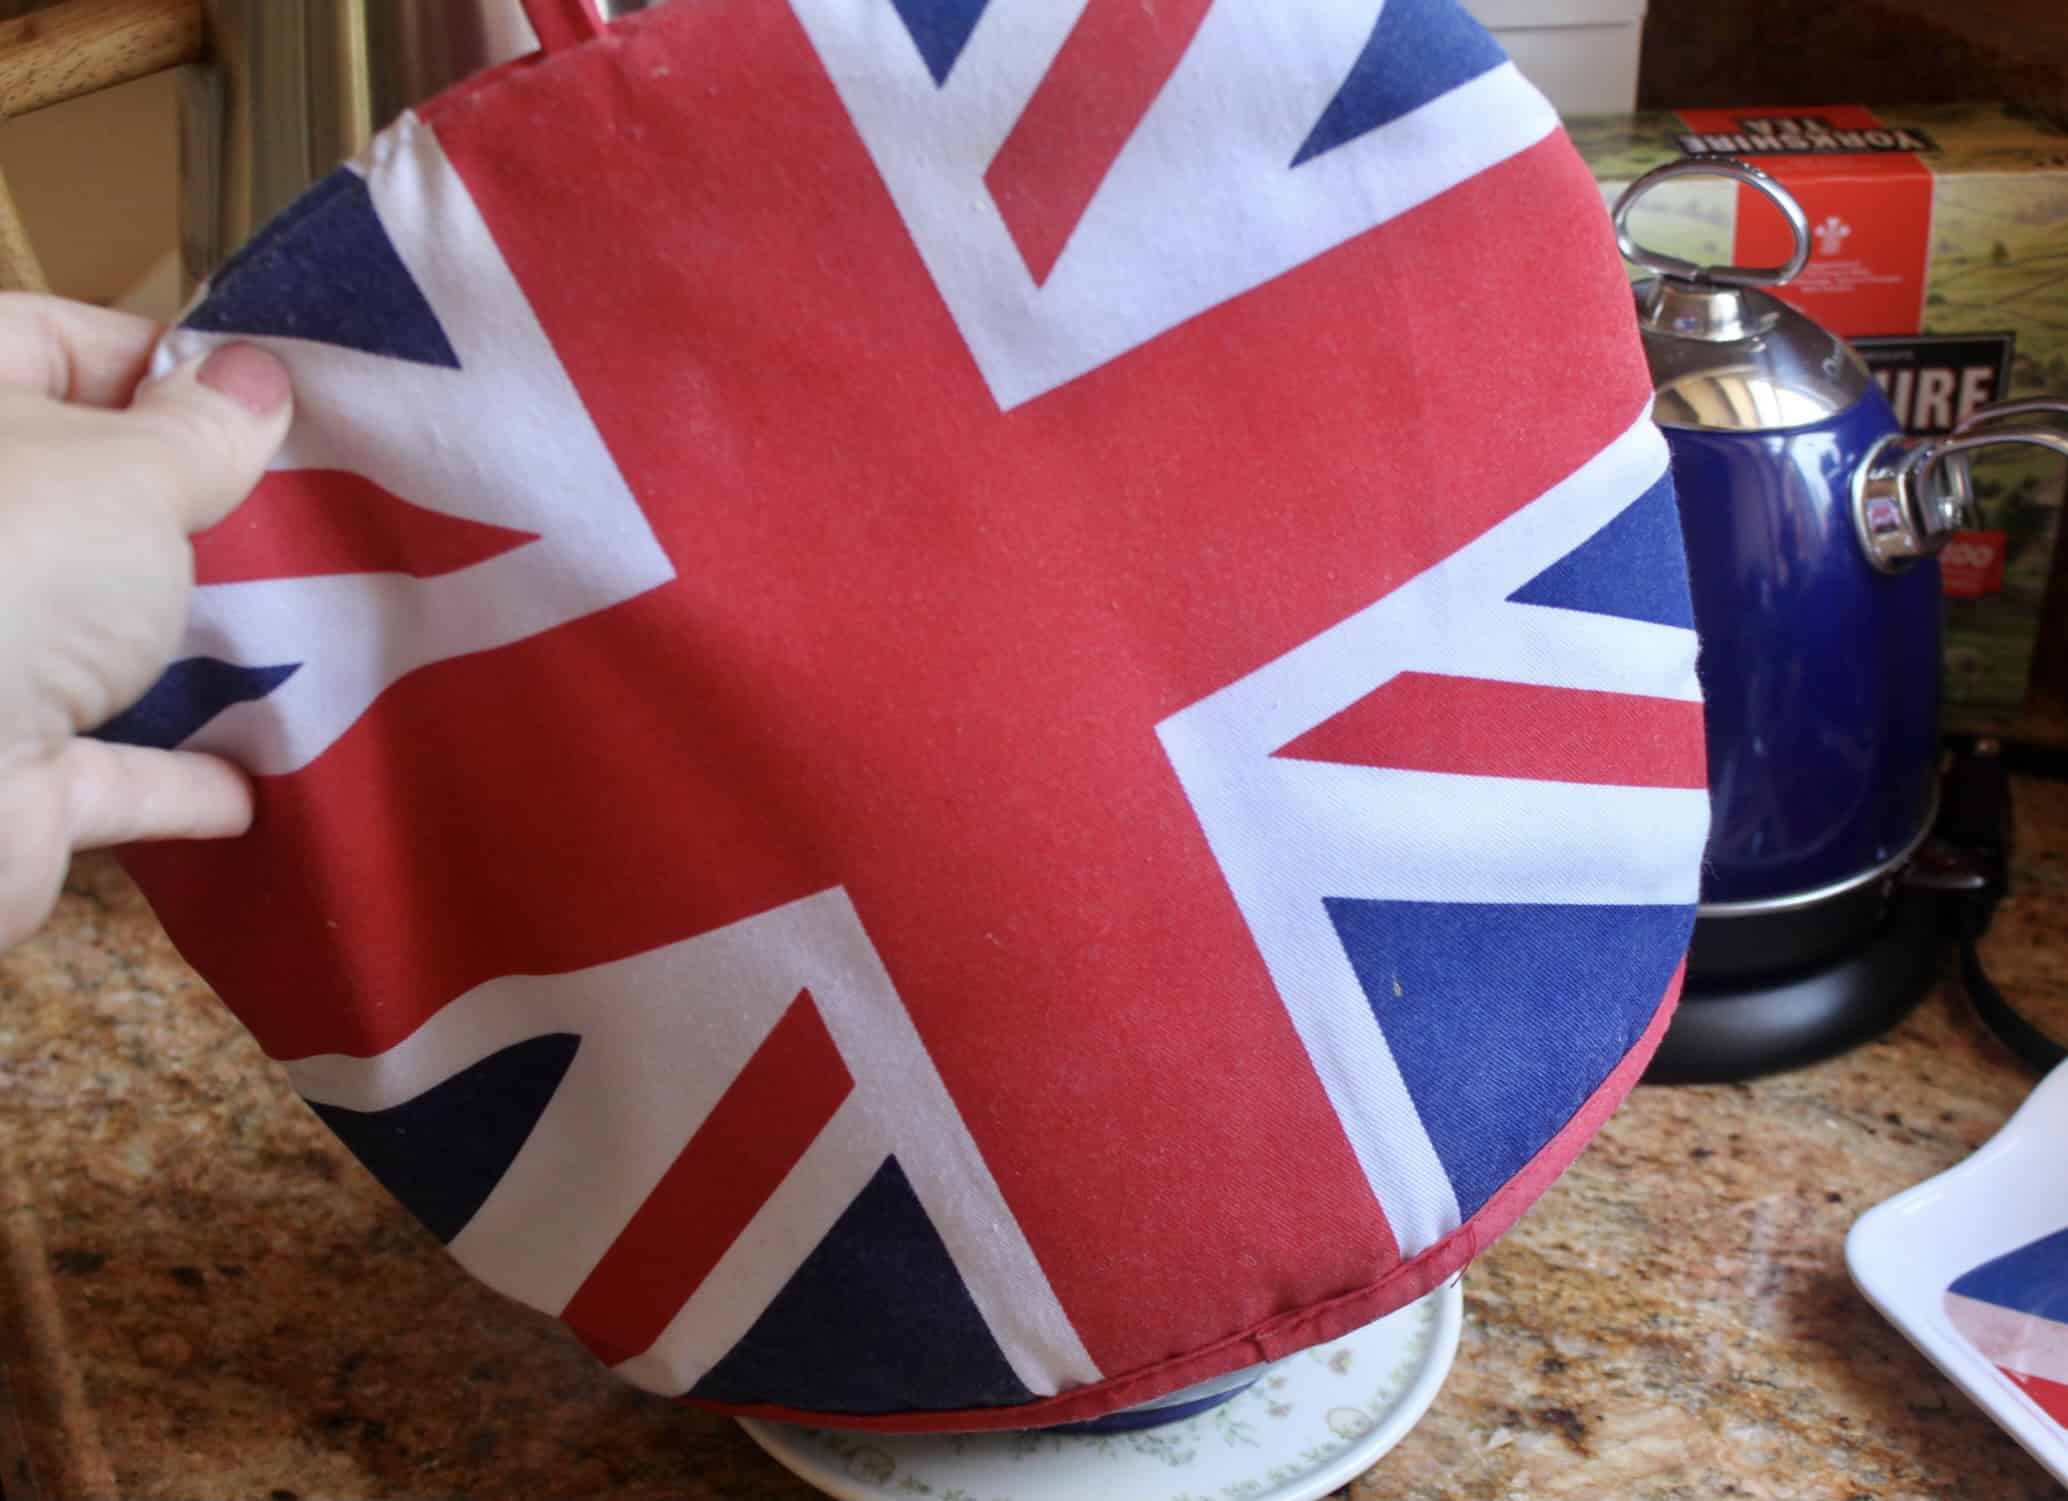 put the Union Jack teapot in the teapot